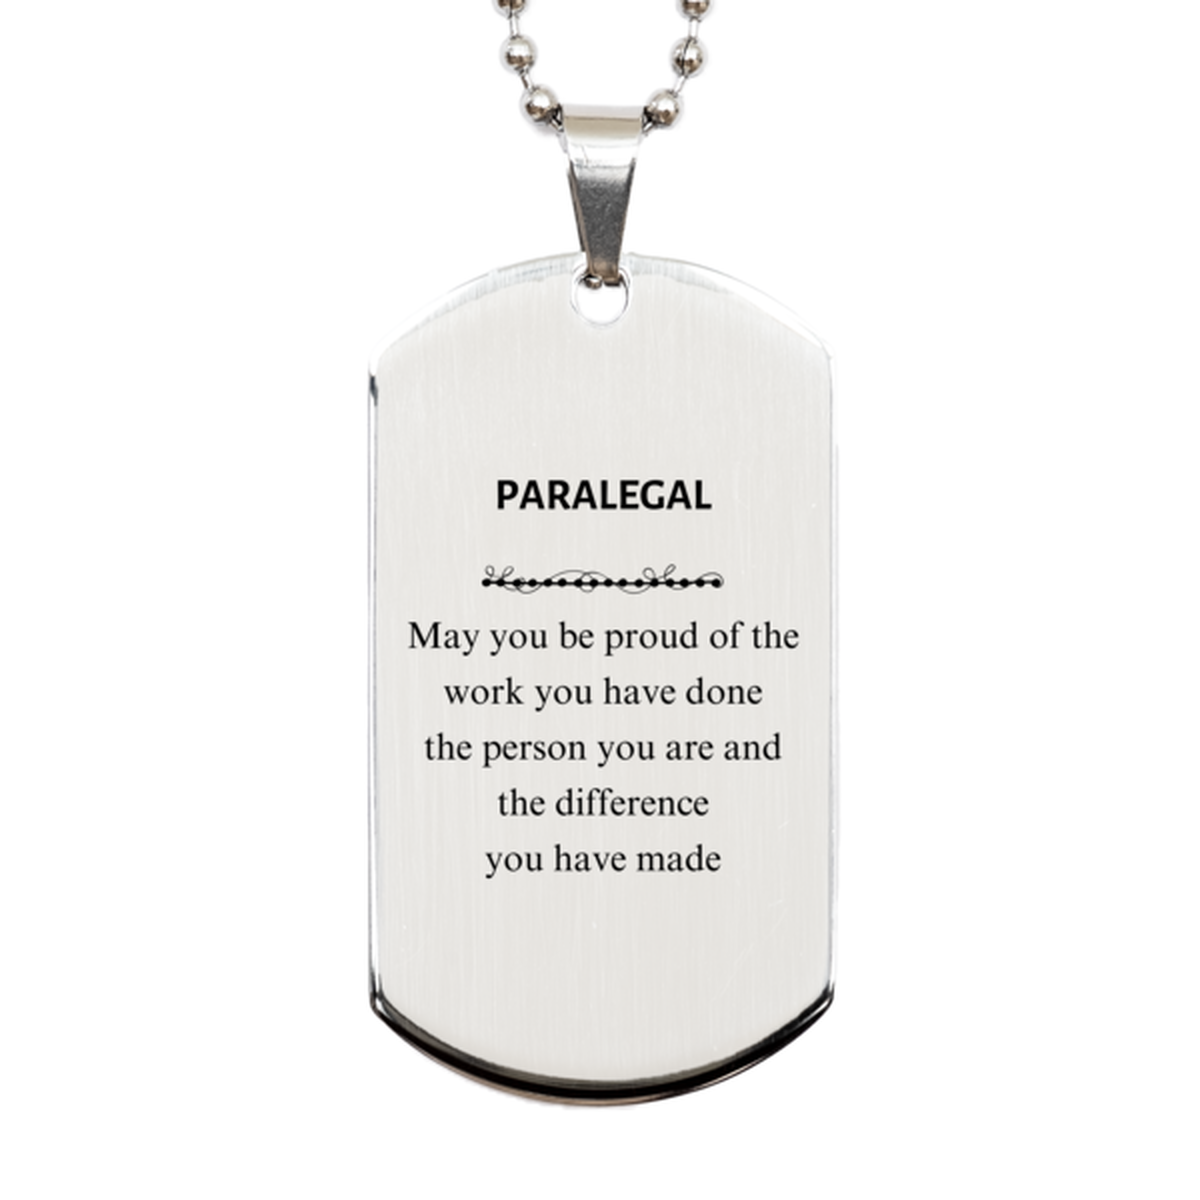 Paralegal May you be proud of the work you have done, Retirement Paralegal Silver Dog Tag for Colleague Appreciation Gifts Amazing for Paralegal